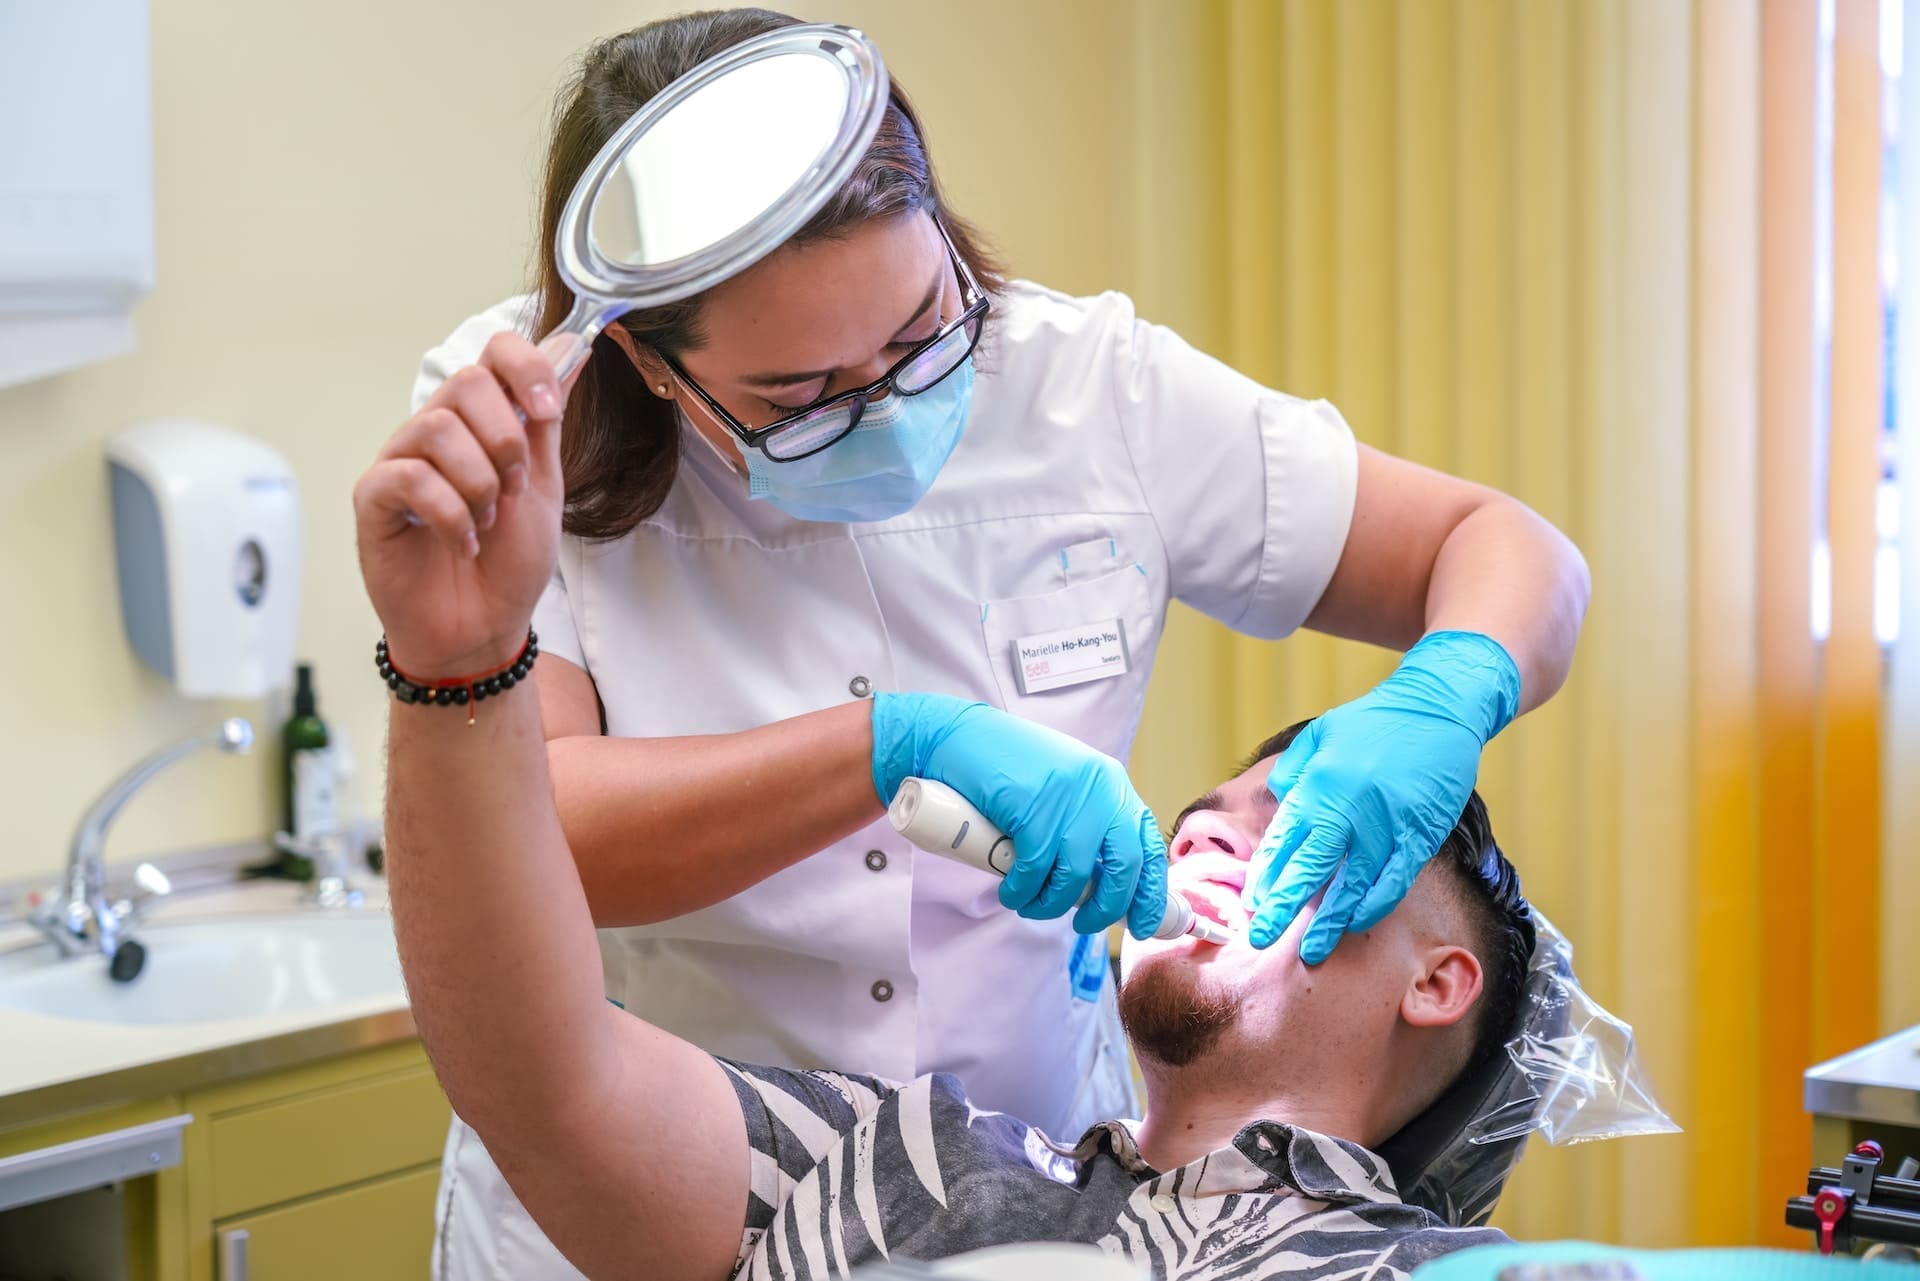 A man undergoing a teeth whitening procedure in a dental chair, with a dentist applying treatment.